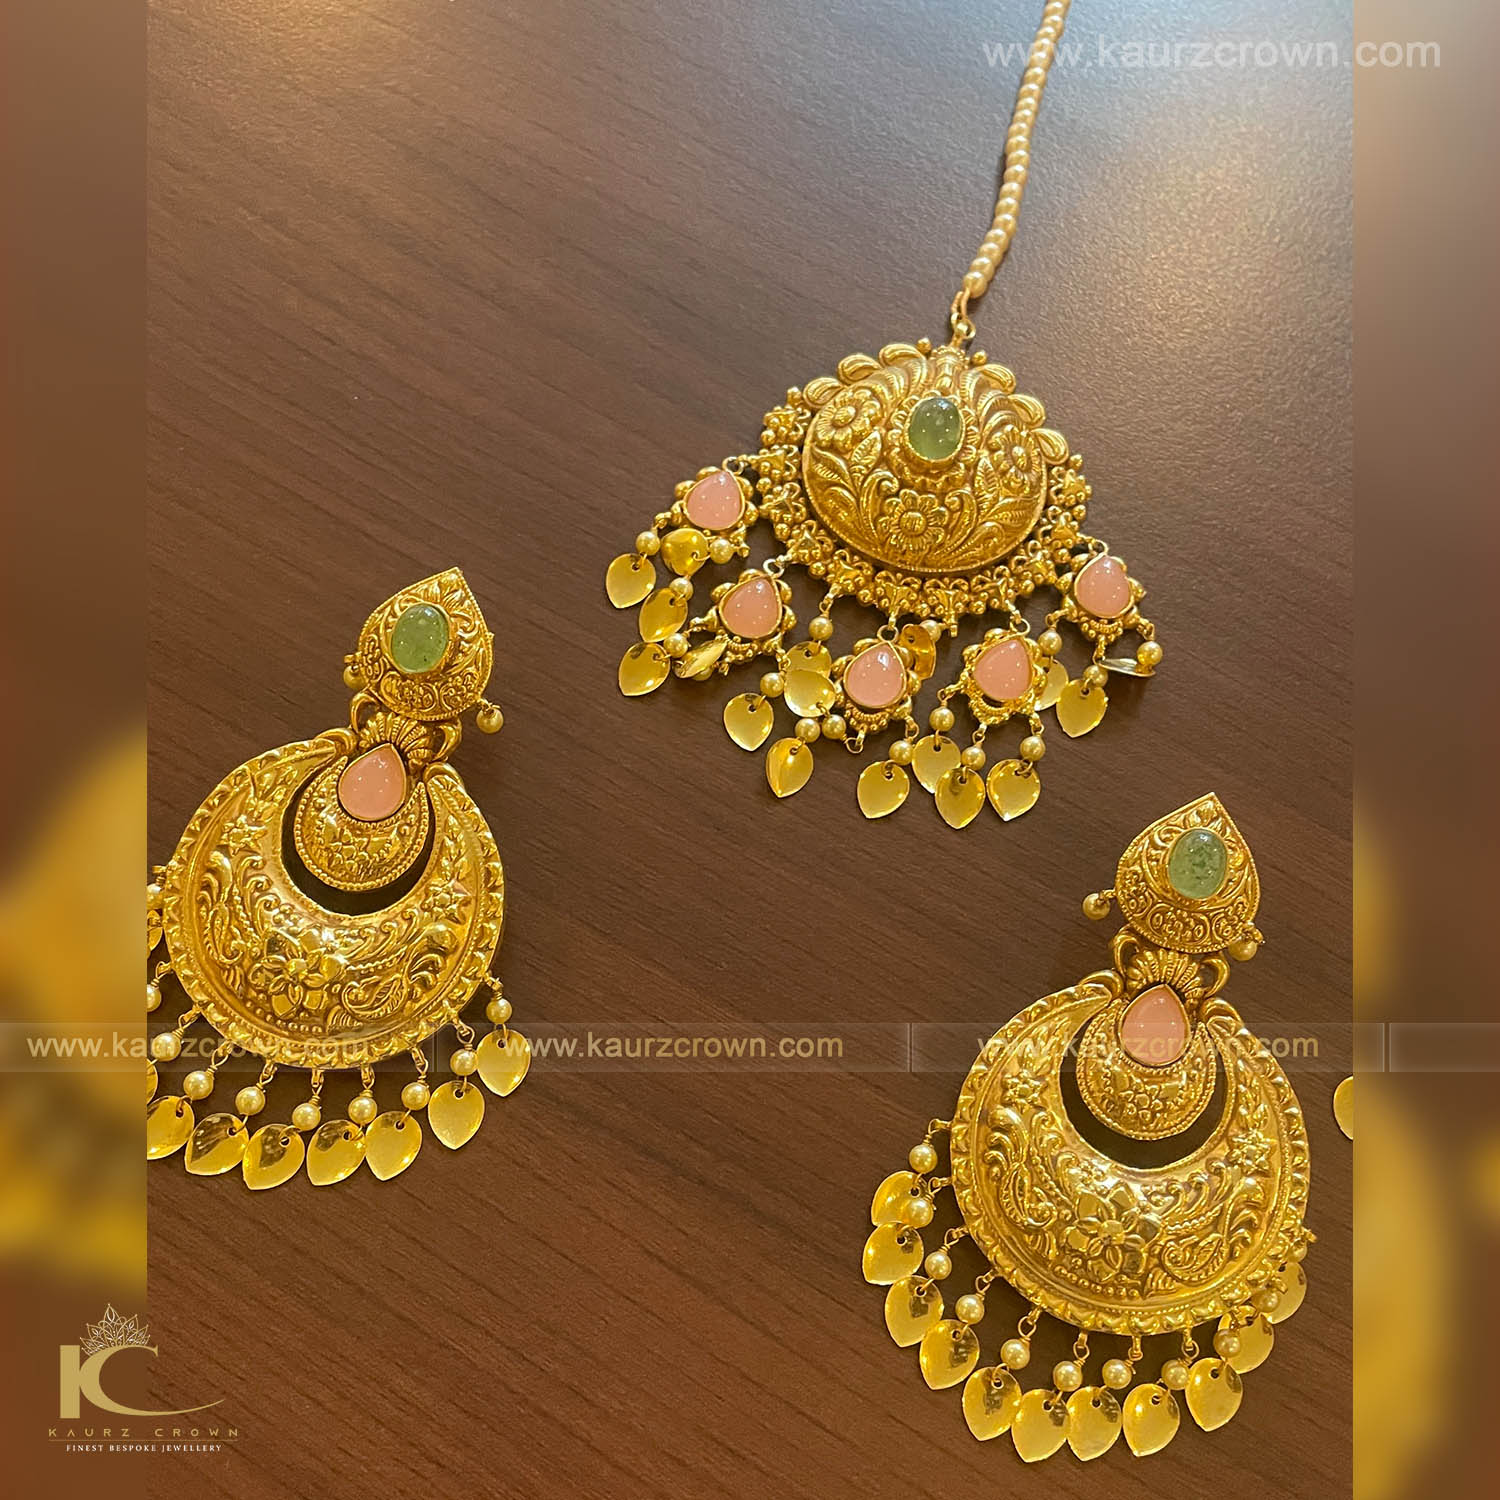 Zoya Traditional Antique Gold Plated Earrings Tikka Set , zoya , traditional , antique , Gold plated , earrings , tikka , set , zoya tikka set , punjabi jewellery , kaurz crown